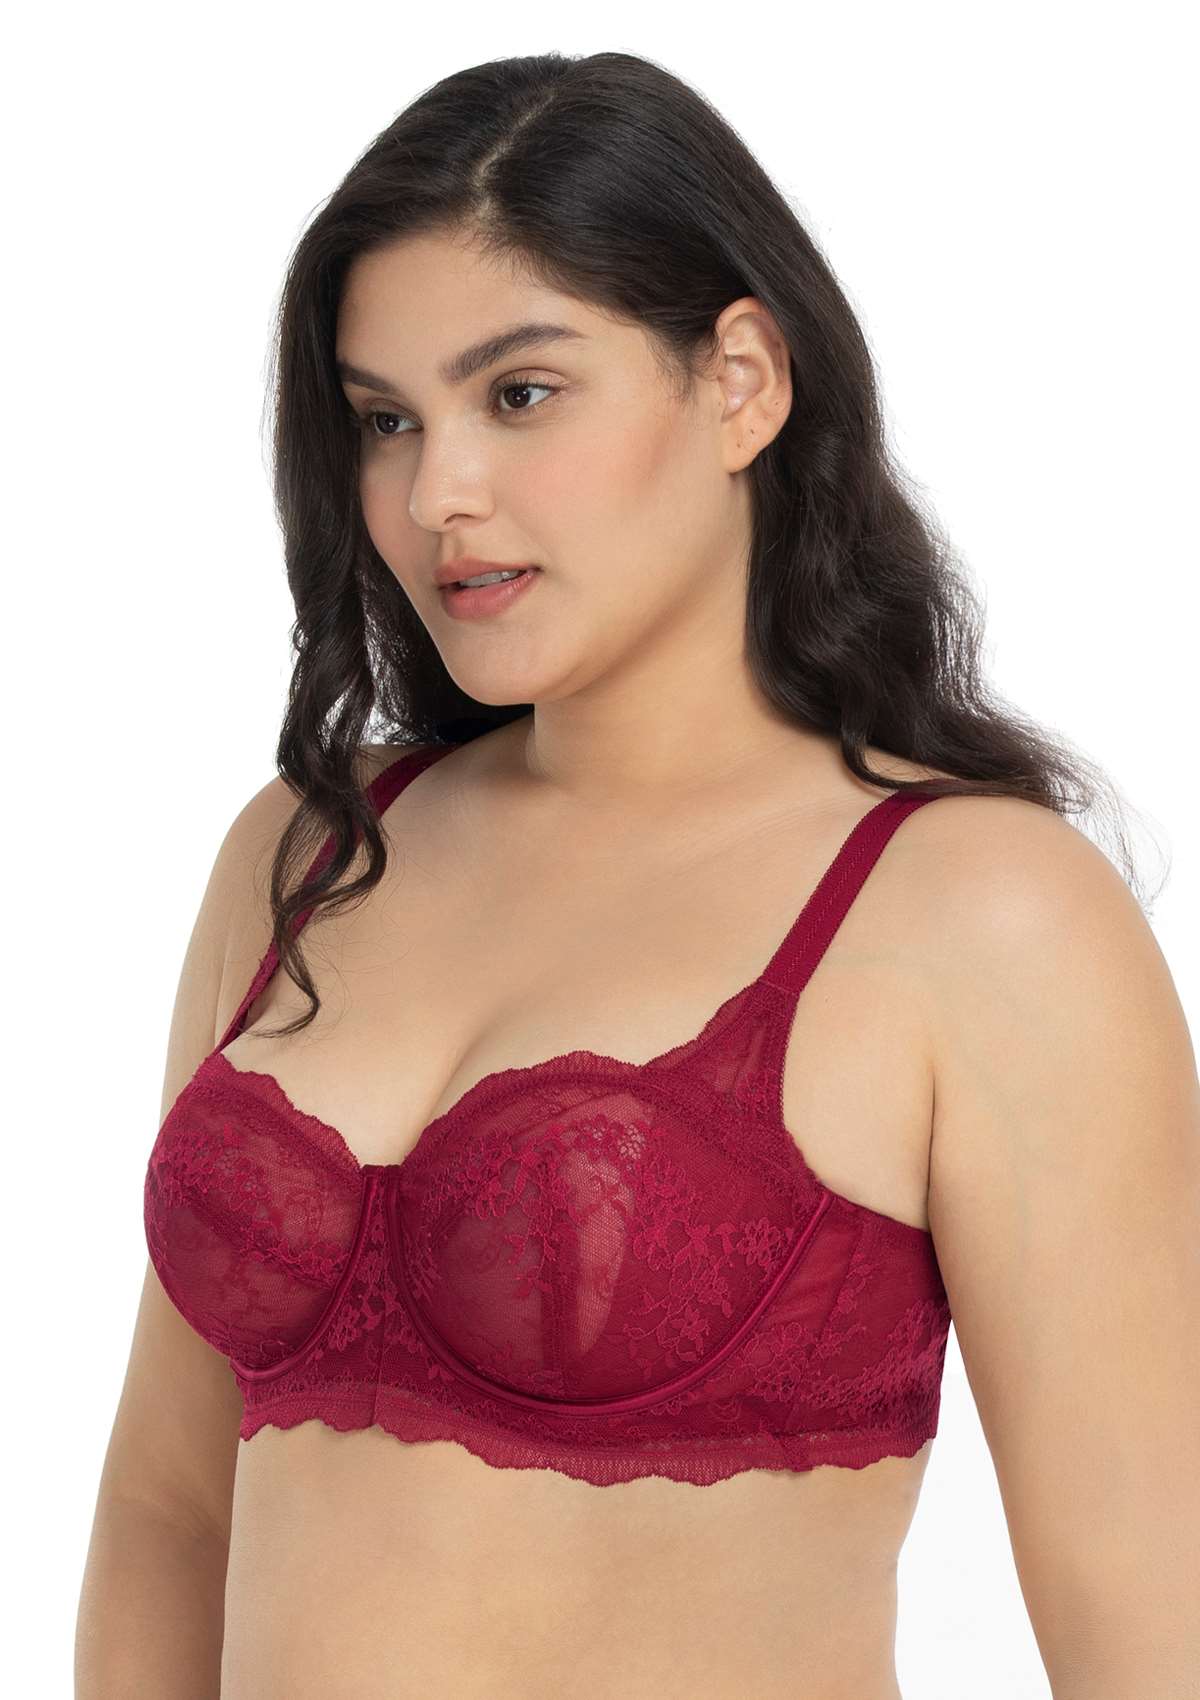 HSIA Floral Lace Unlined Bridal Balconette Bra Set - Supportive Classic - Burgundy / 40 / C